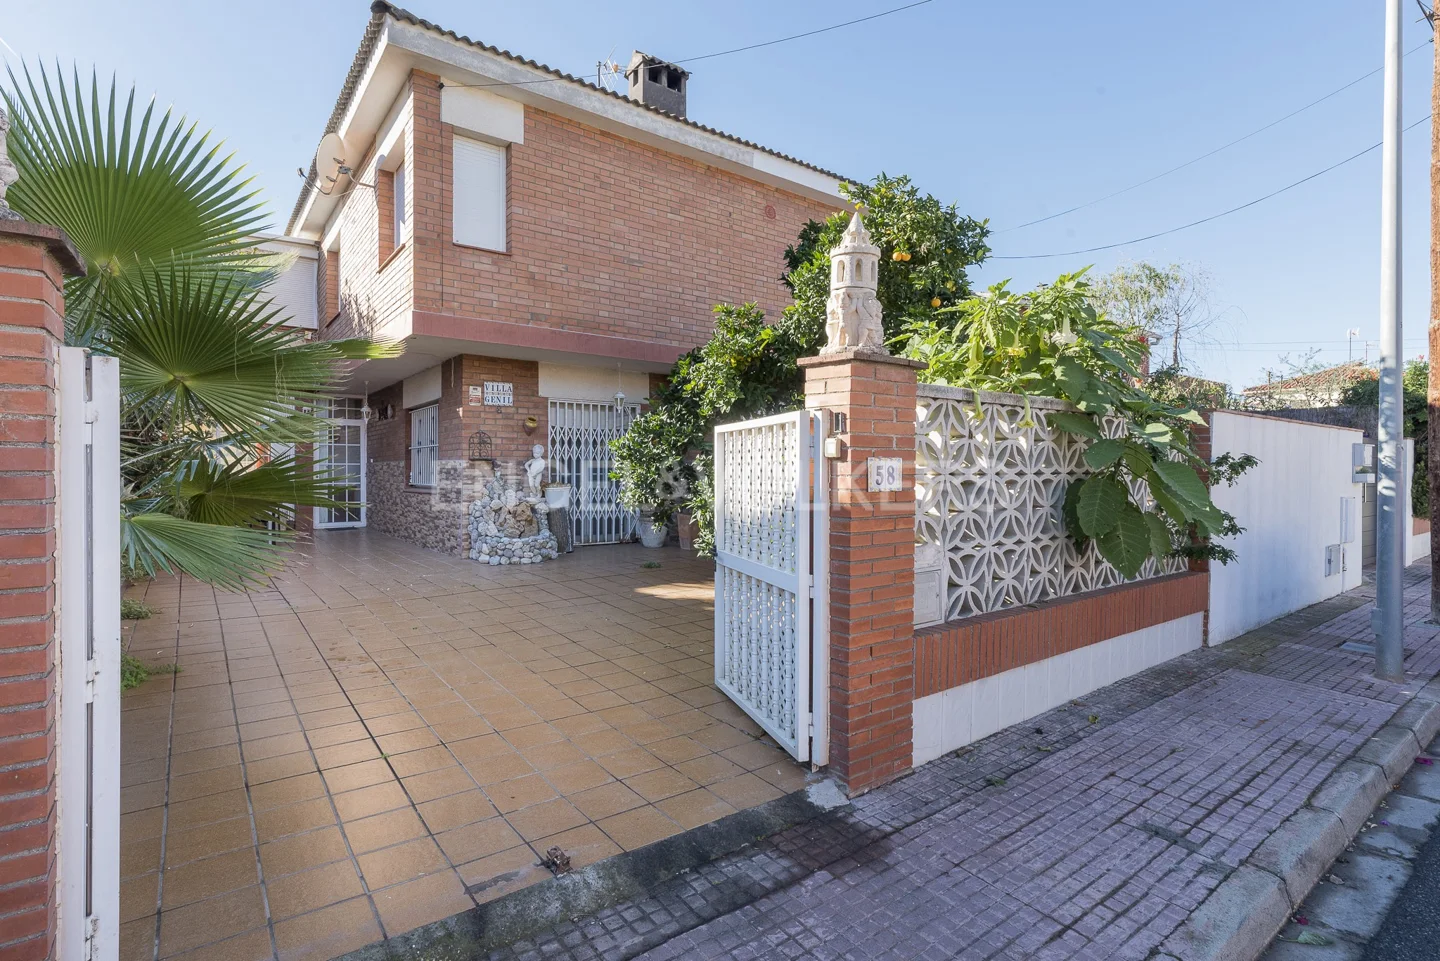 Semi-detached house located on the main street  Rocamar